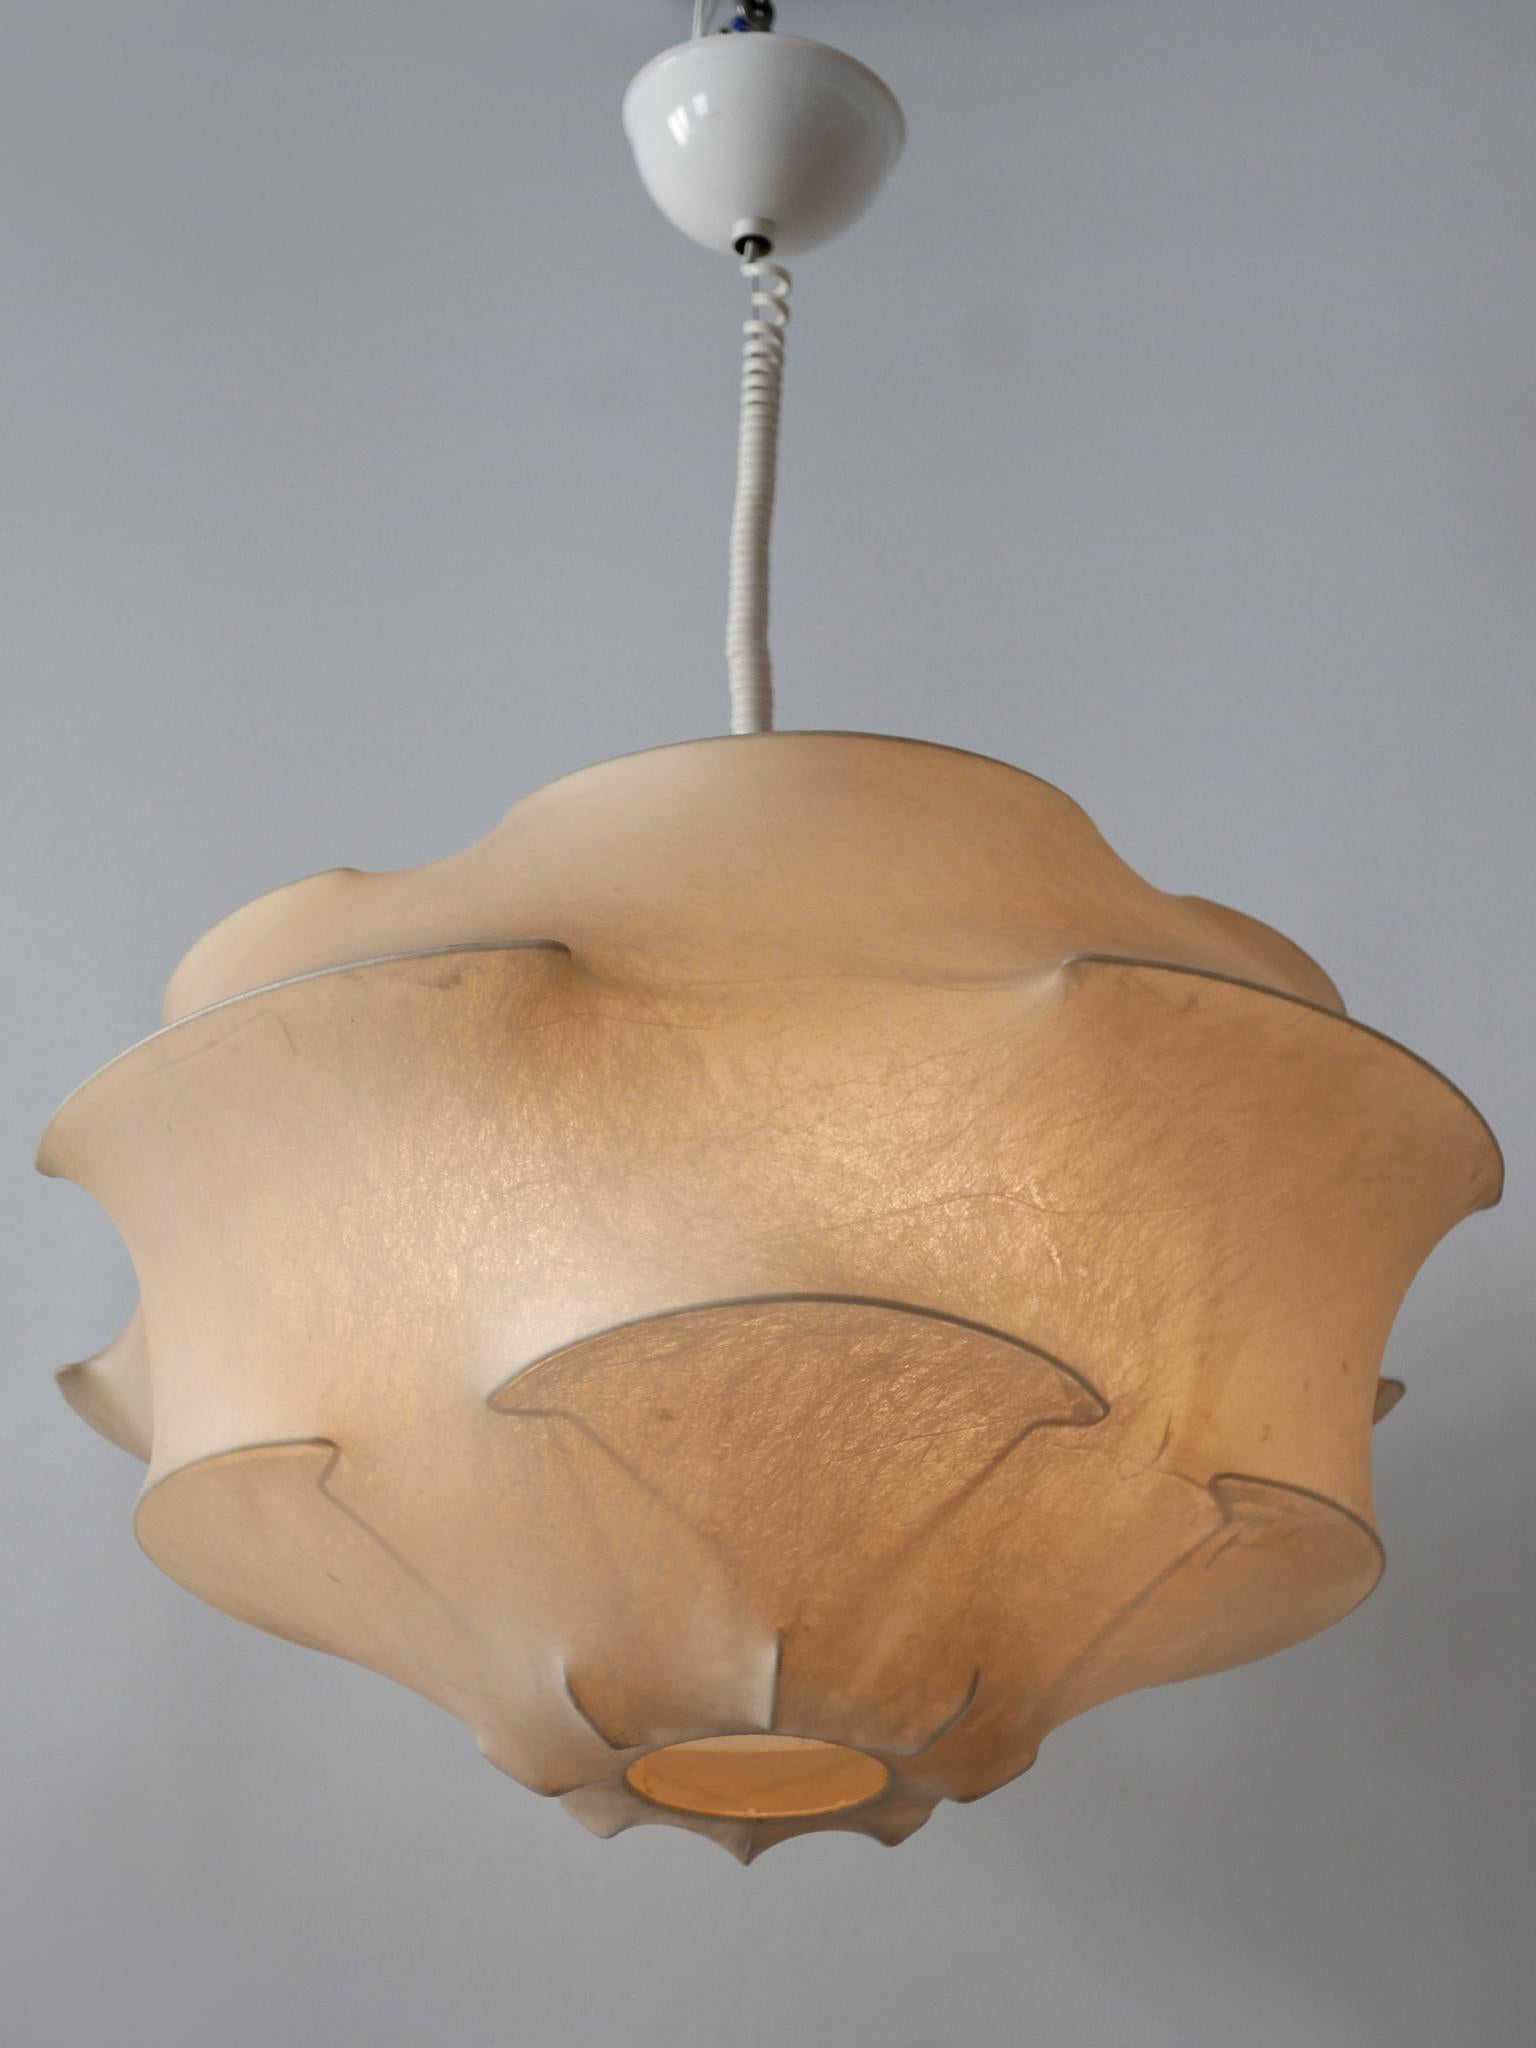 XL Mid-Century Modern Cocoon Pendant Lamp or Hanging Light by Flos Italy, 1960s For Sale 7